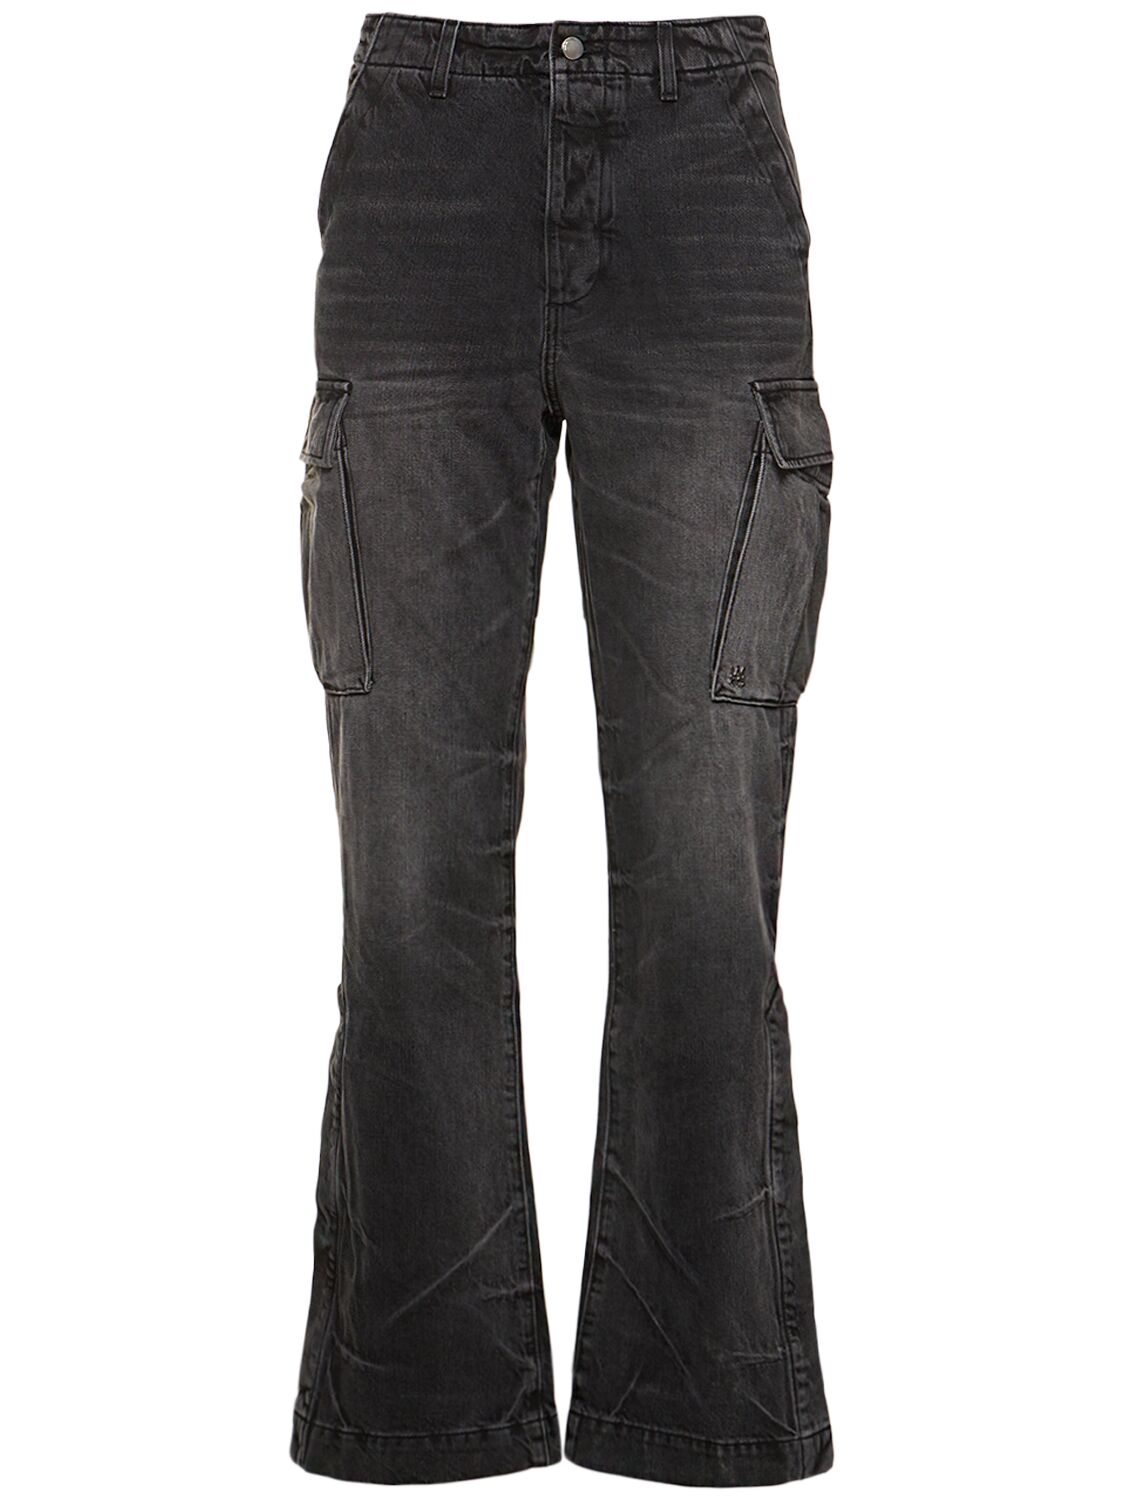 Image of M65 Cotton Cargo Jeans